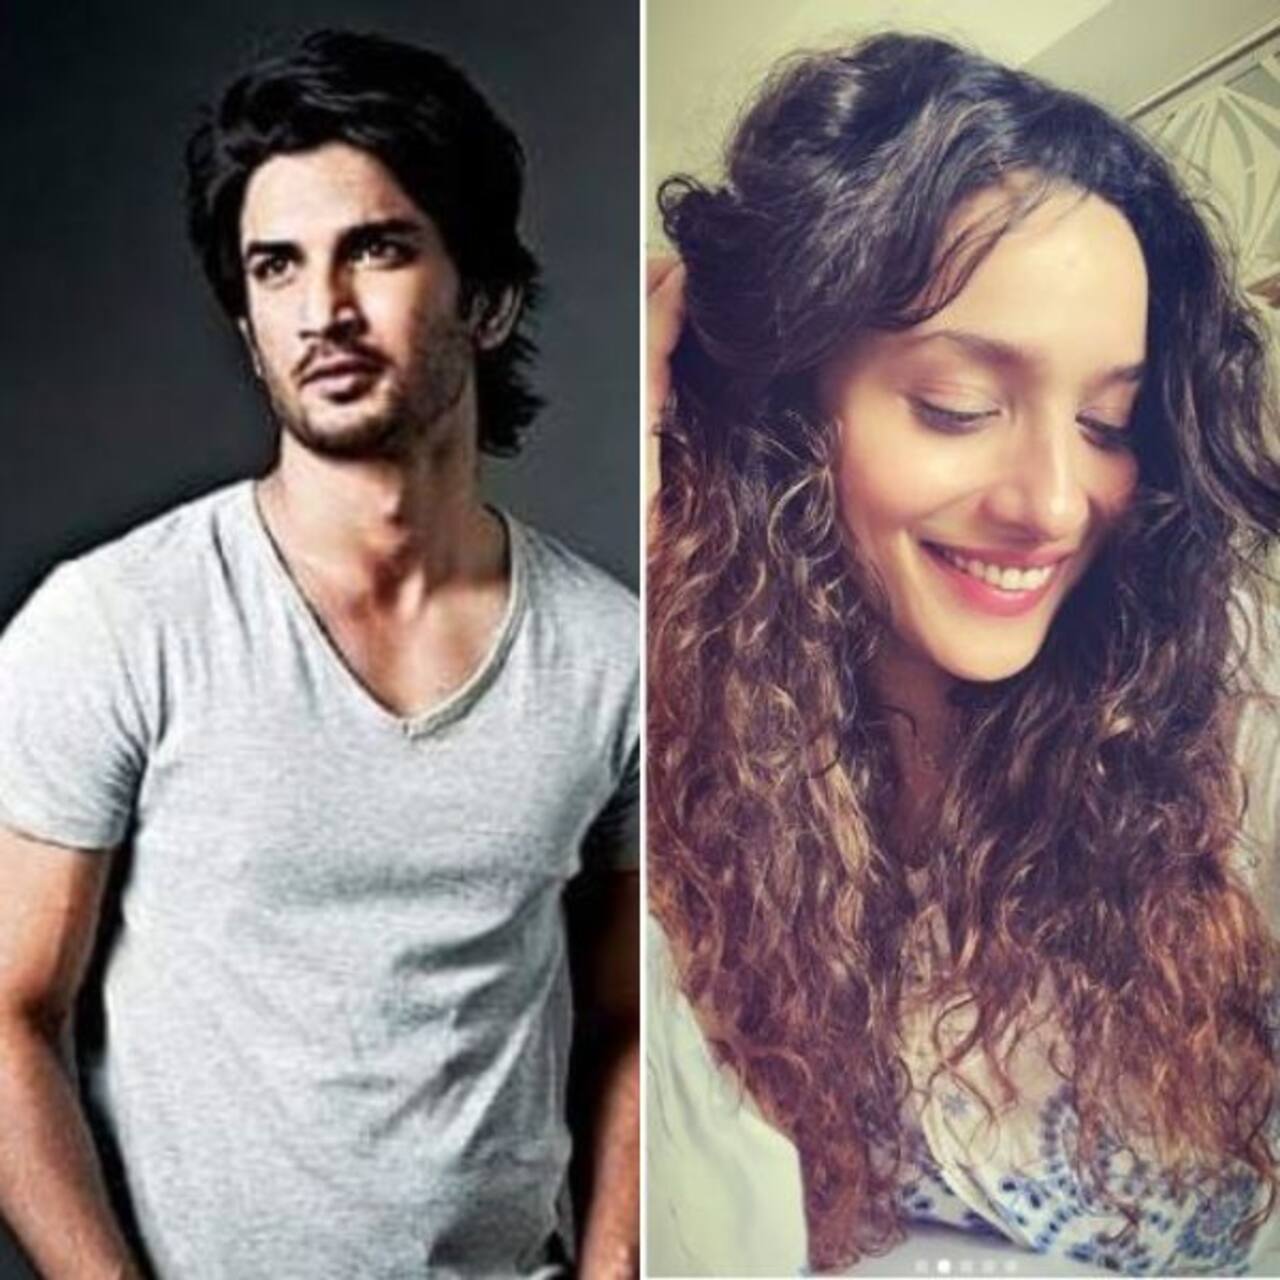 RIP Sushant Singh Rajput: The actor could not get over his breakup with Ankita Lokhande? Psychaitrist's statement reveals details of personal torment